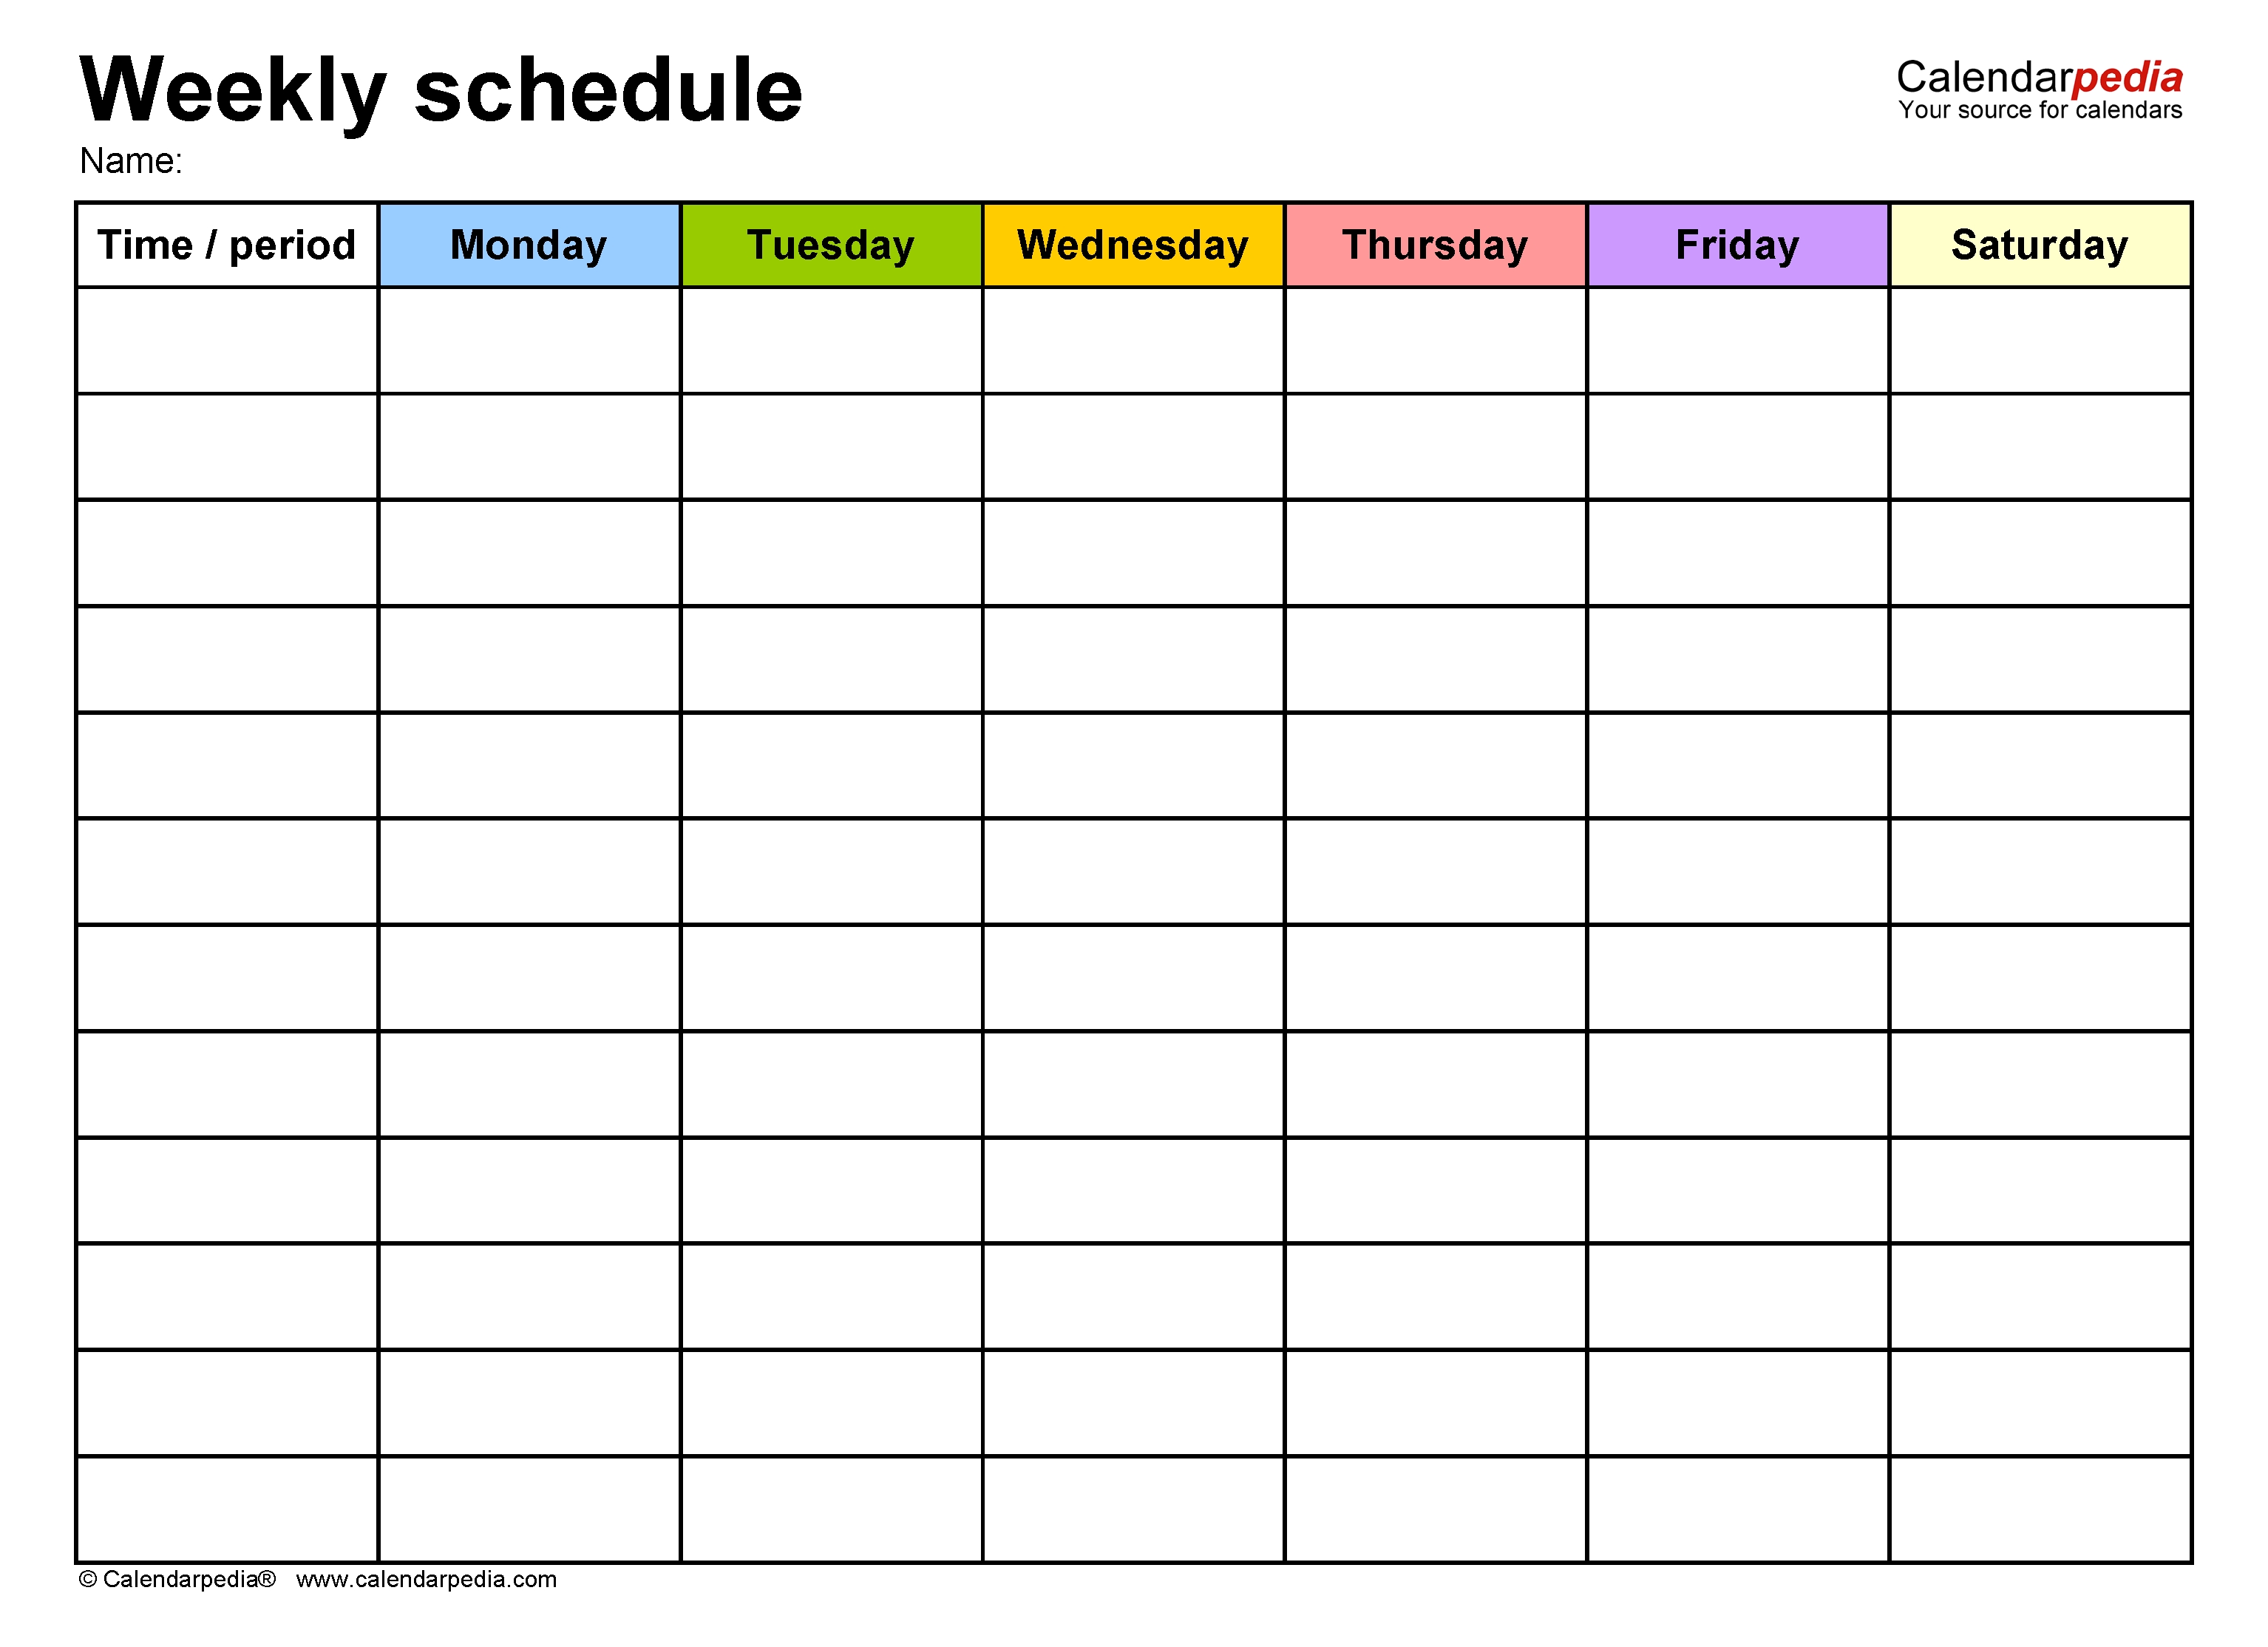 Free Weekly Schedule Templates For Word - 18 Templates  Calendar With 6 Day Weeks